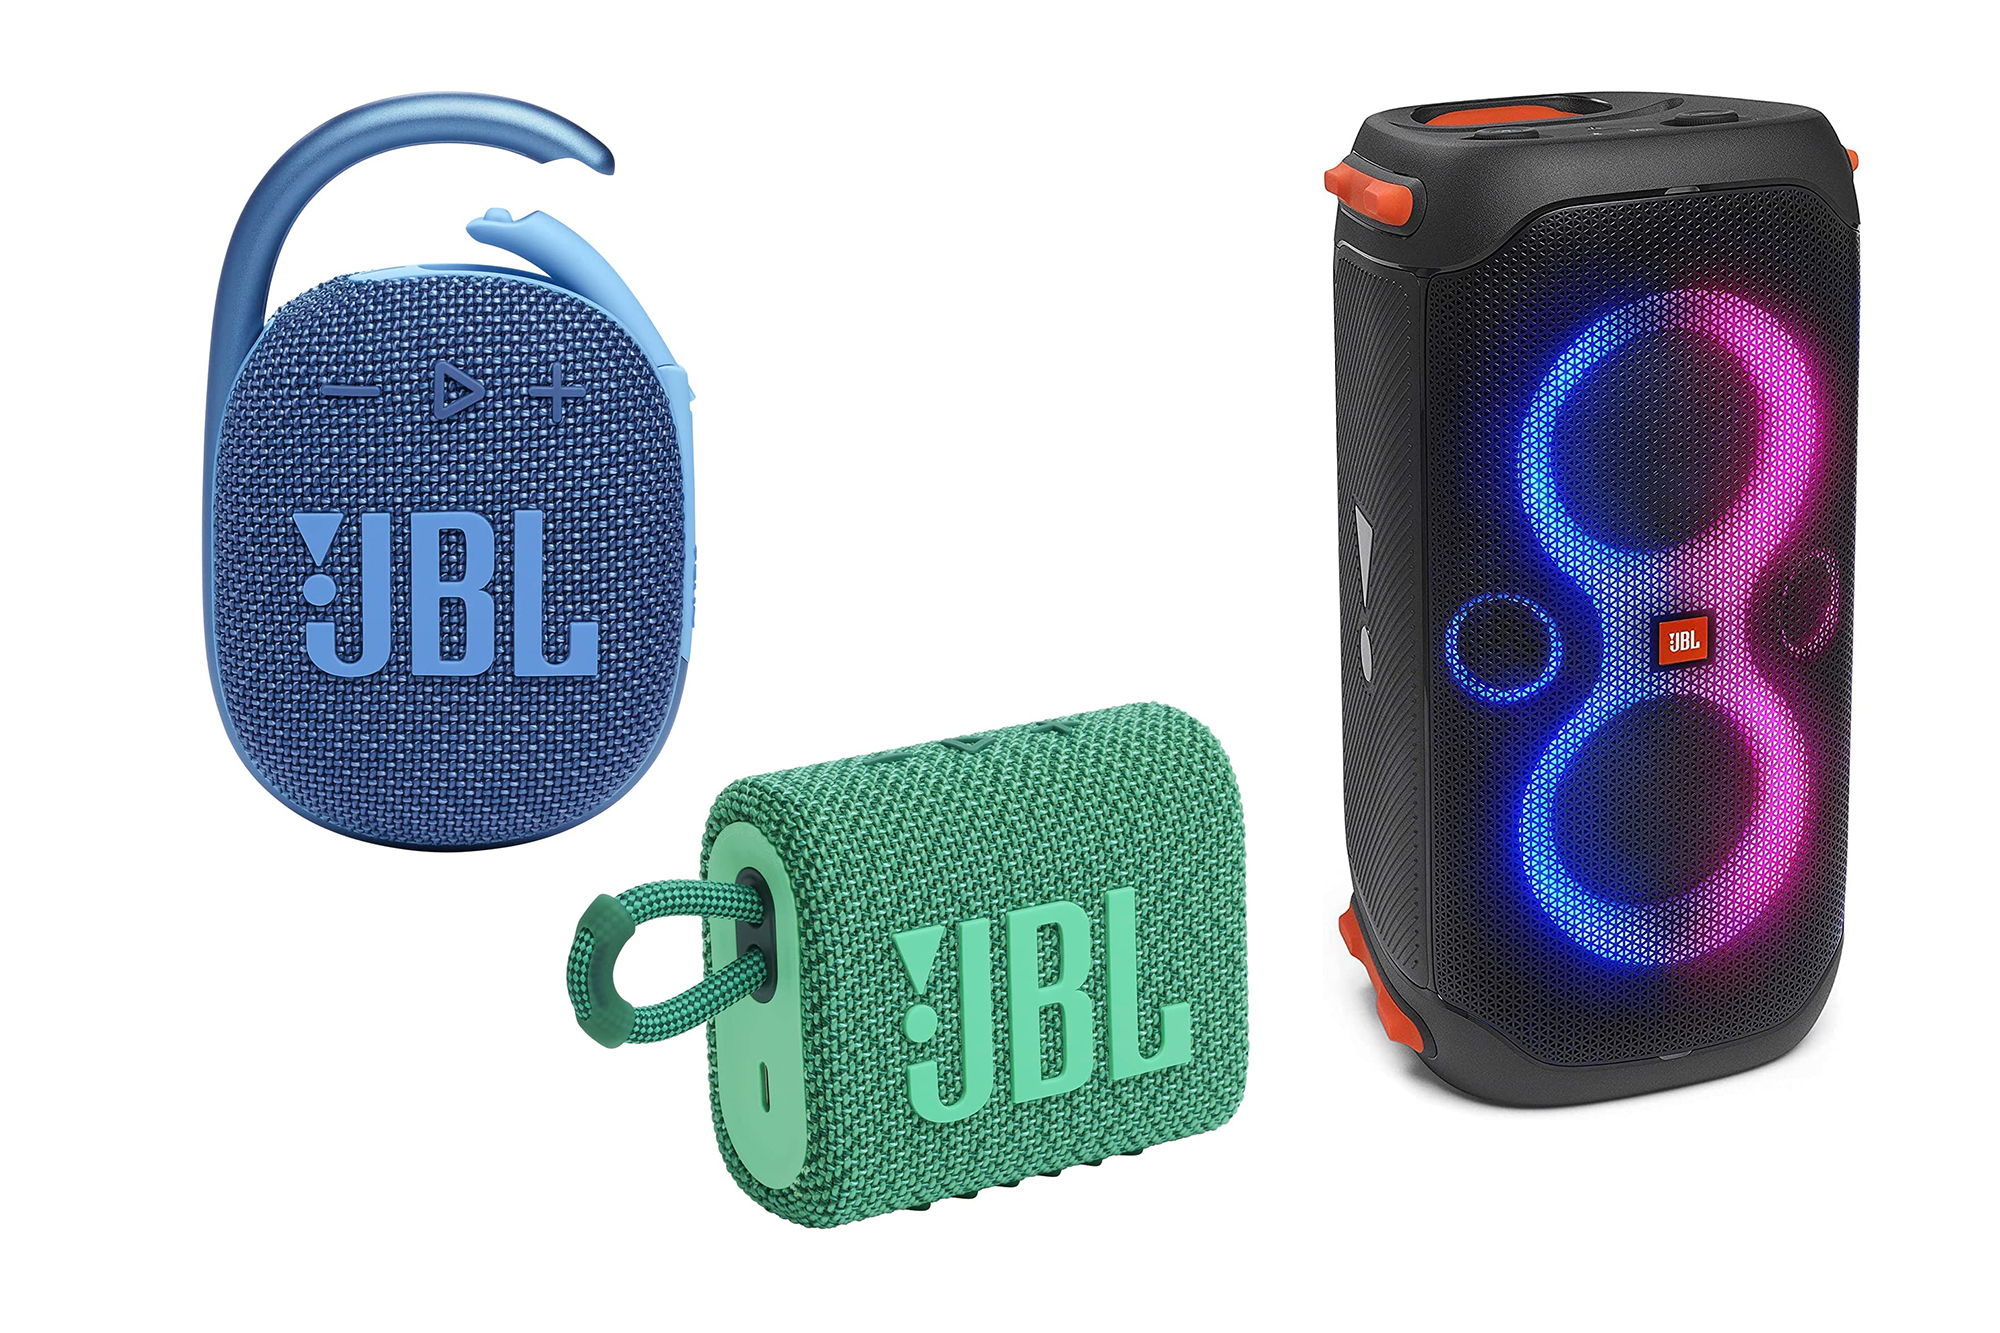 Bring all the bops and outdoor speaker Science deals on Popular the to with boys | Amazon yard